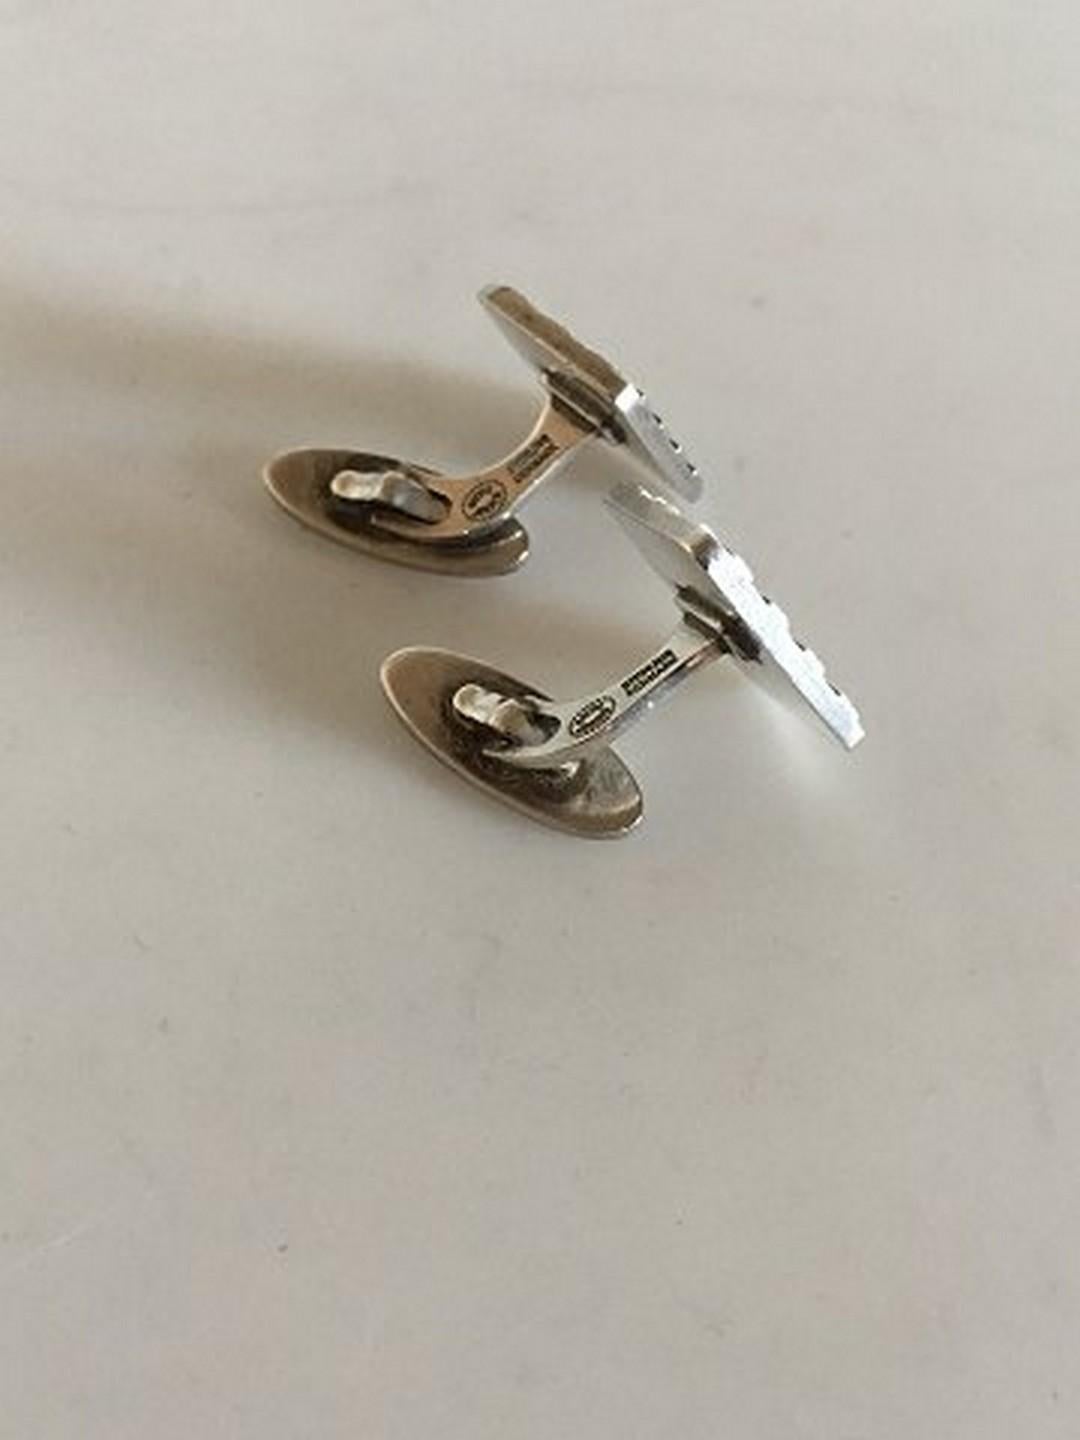 Georg Jensen Sterling Silver Cuff Links No 113. Measures 1.7 cm / 0 43/64 in. Weighs 15 g / 0.55 oz. From after 1945.